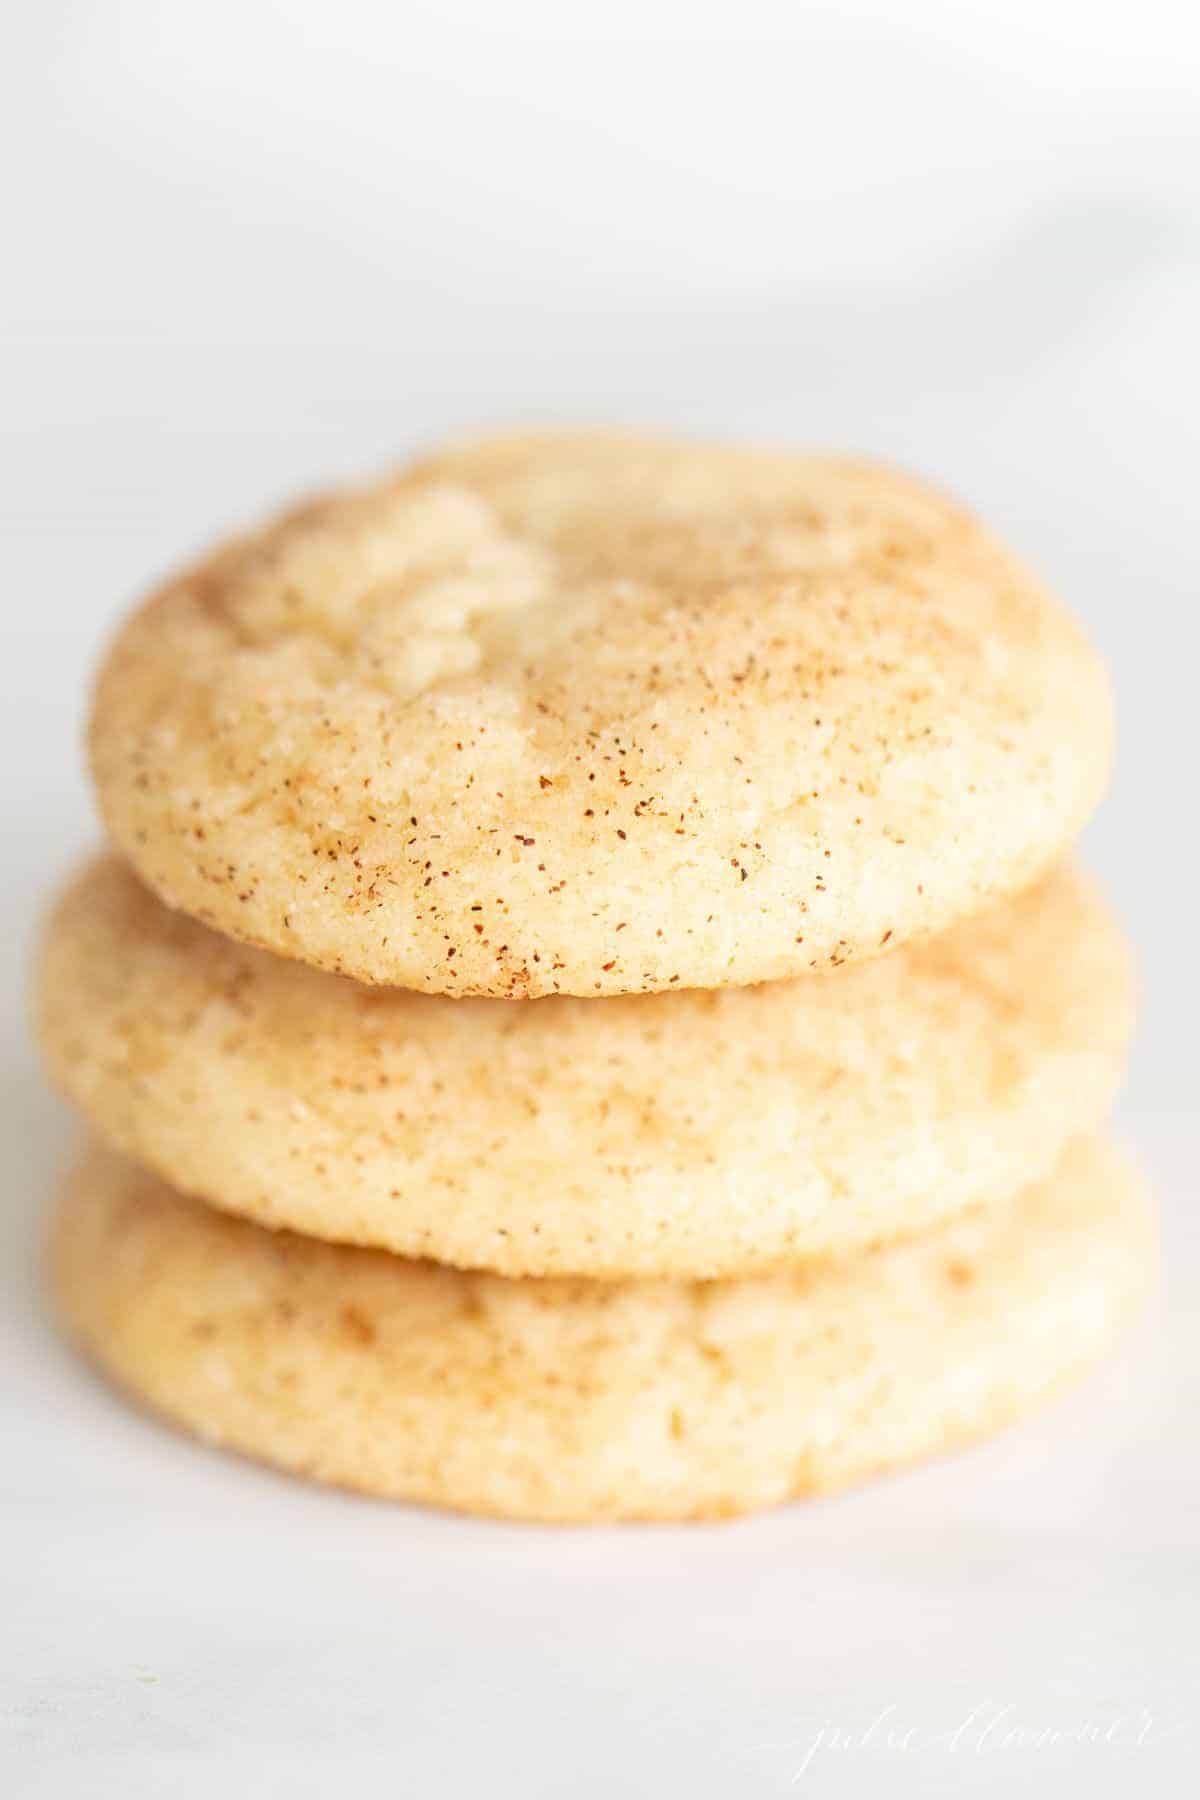 A stack of three snickerdoodle cookies without cream of tartar on a marble surface.